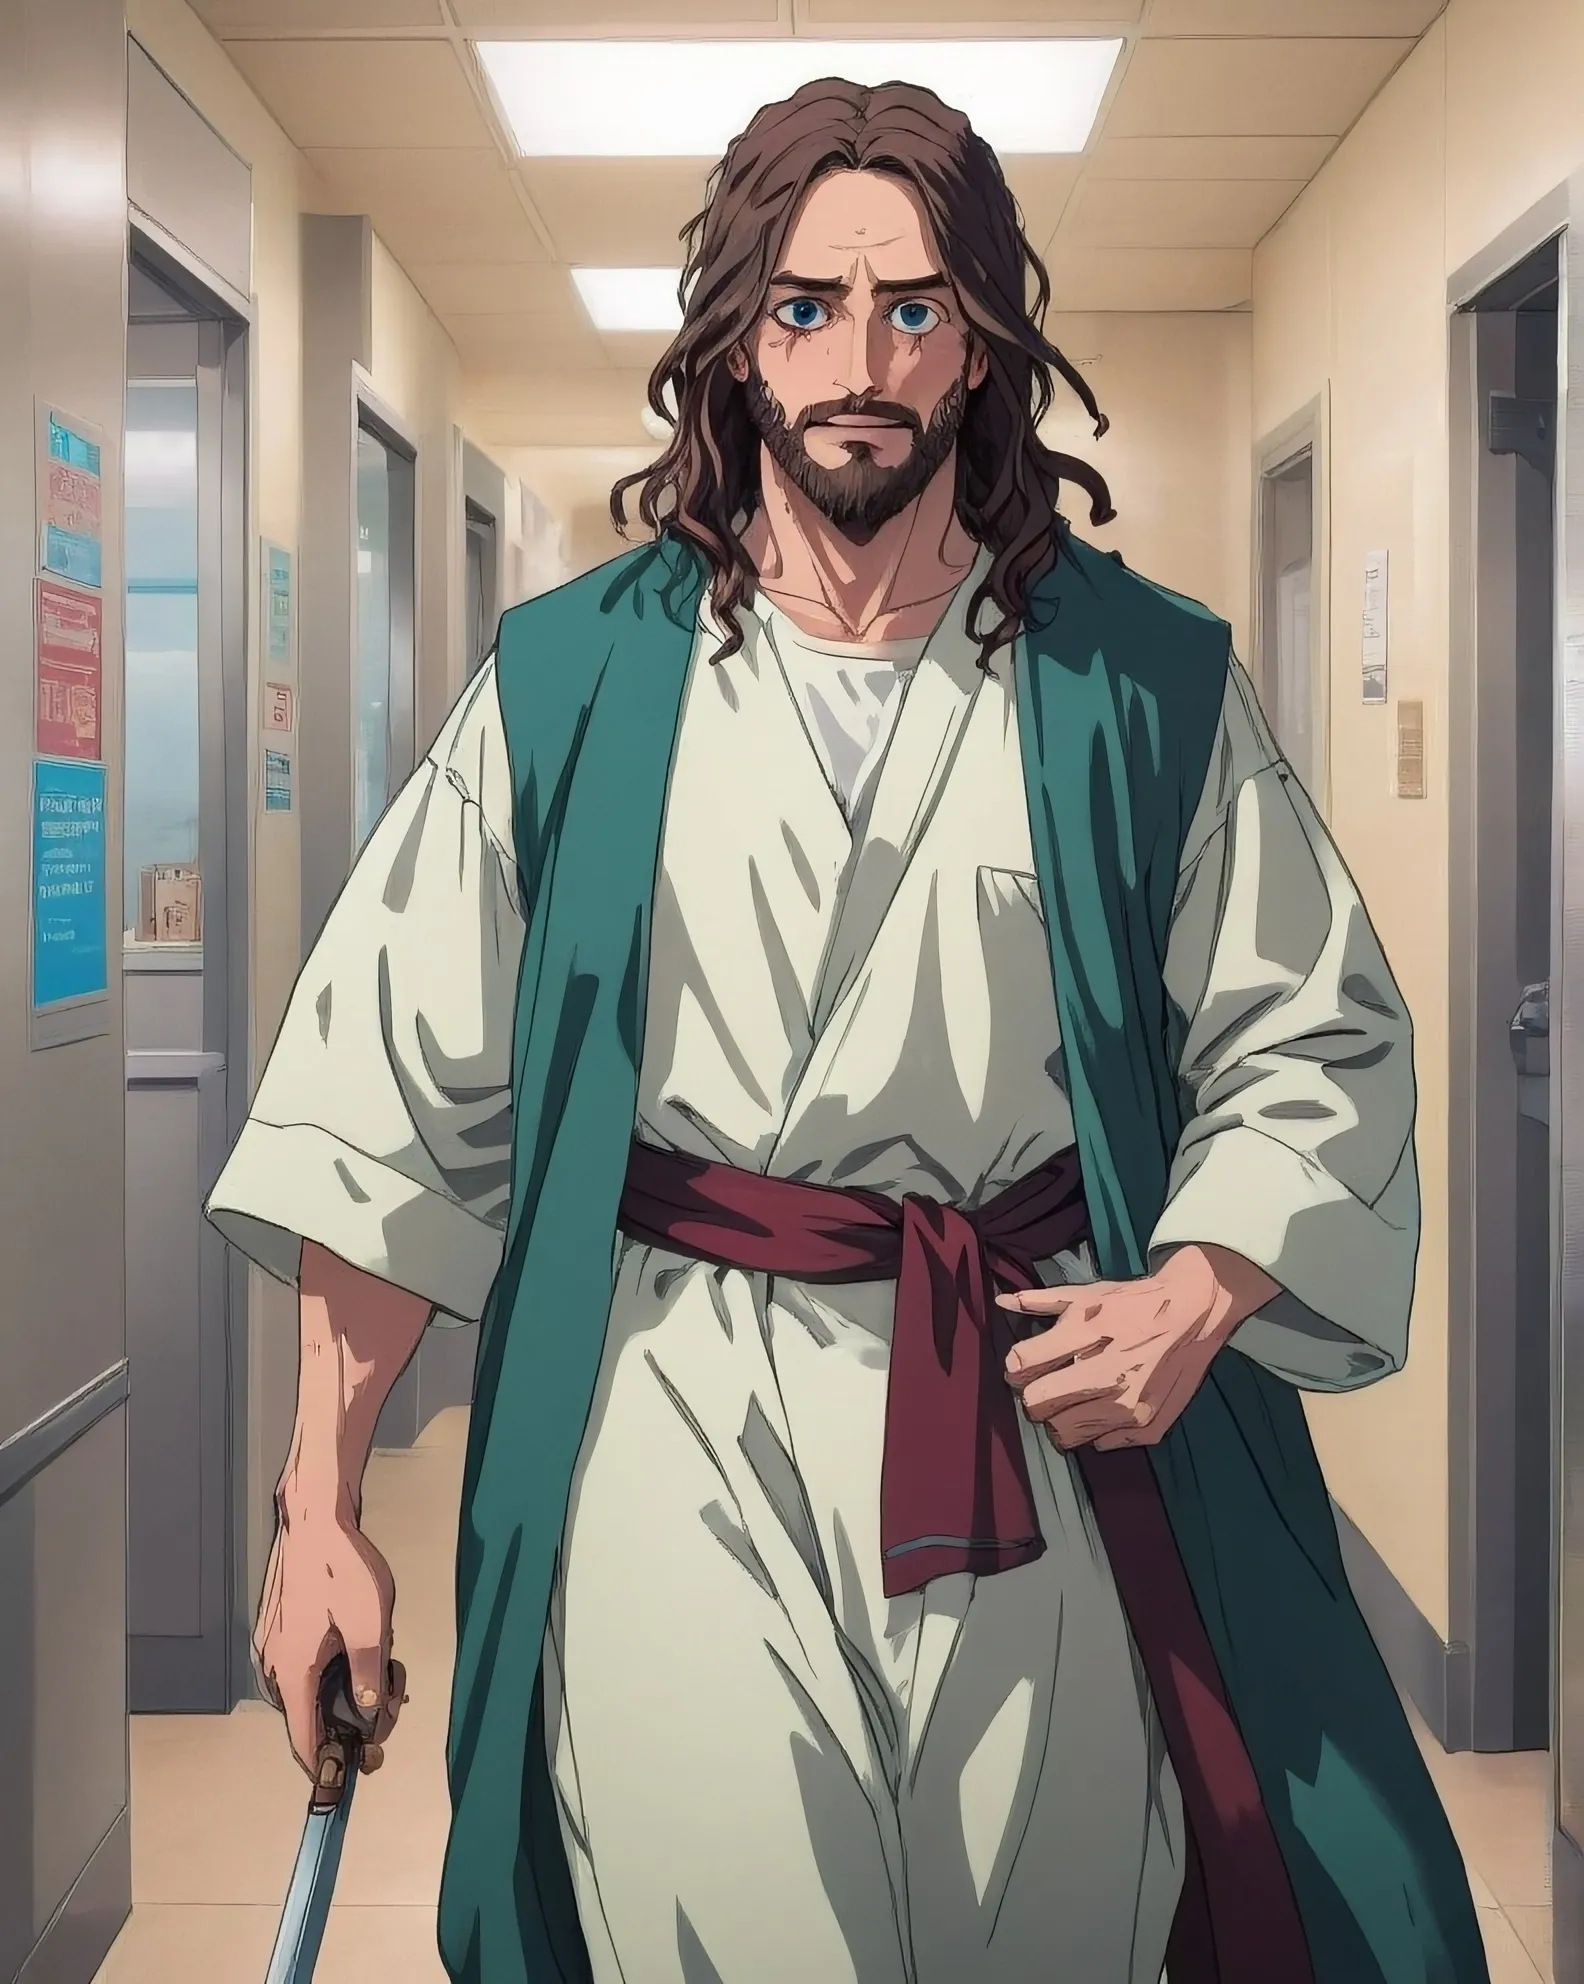 Jesus Christ the Demon Slayer getting up to go to work at a job he hates.